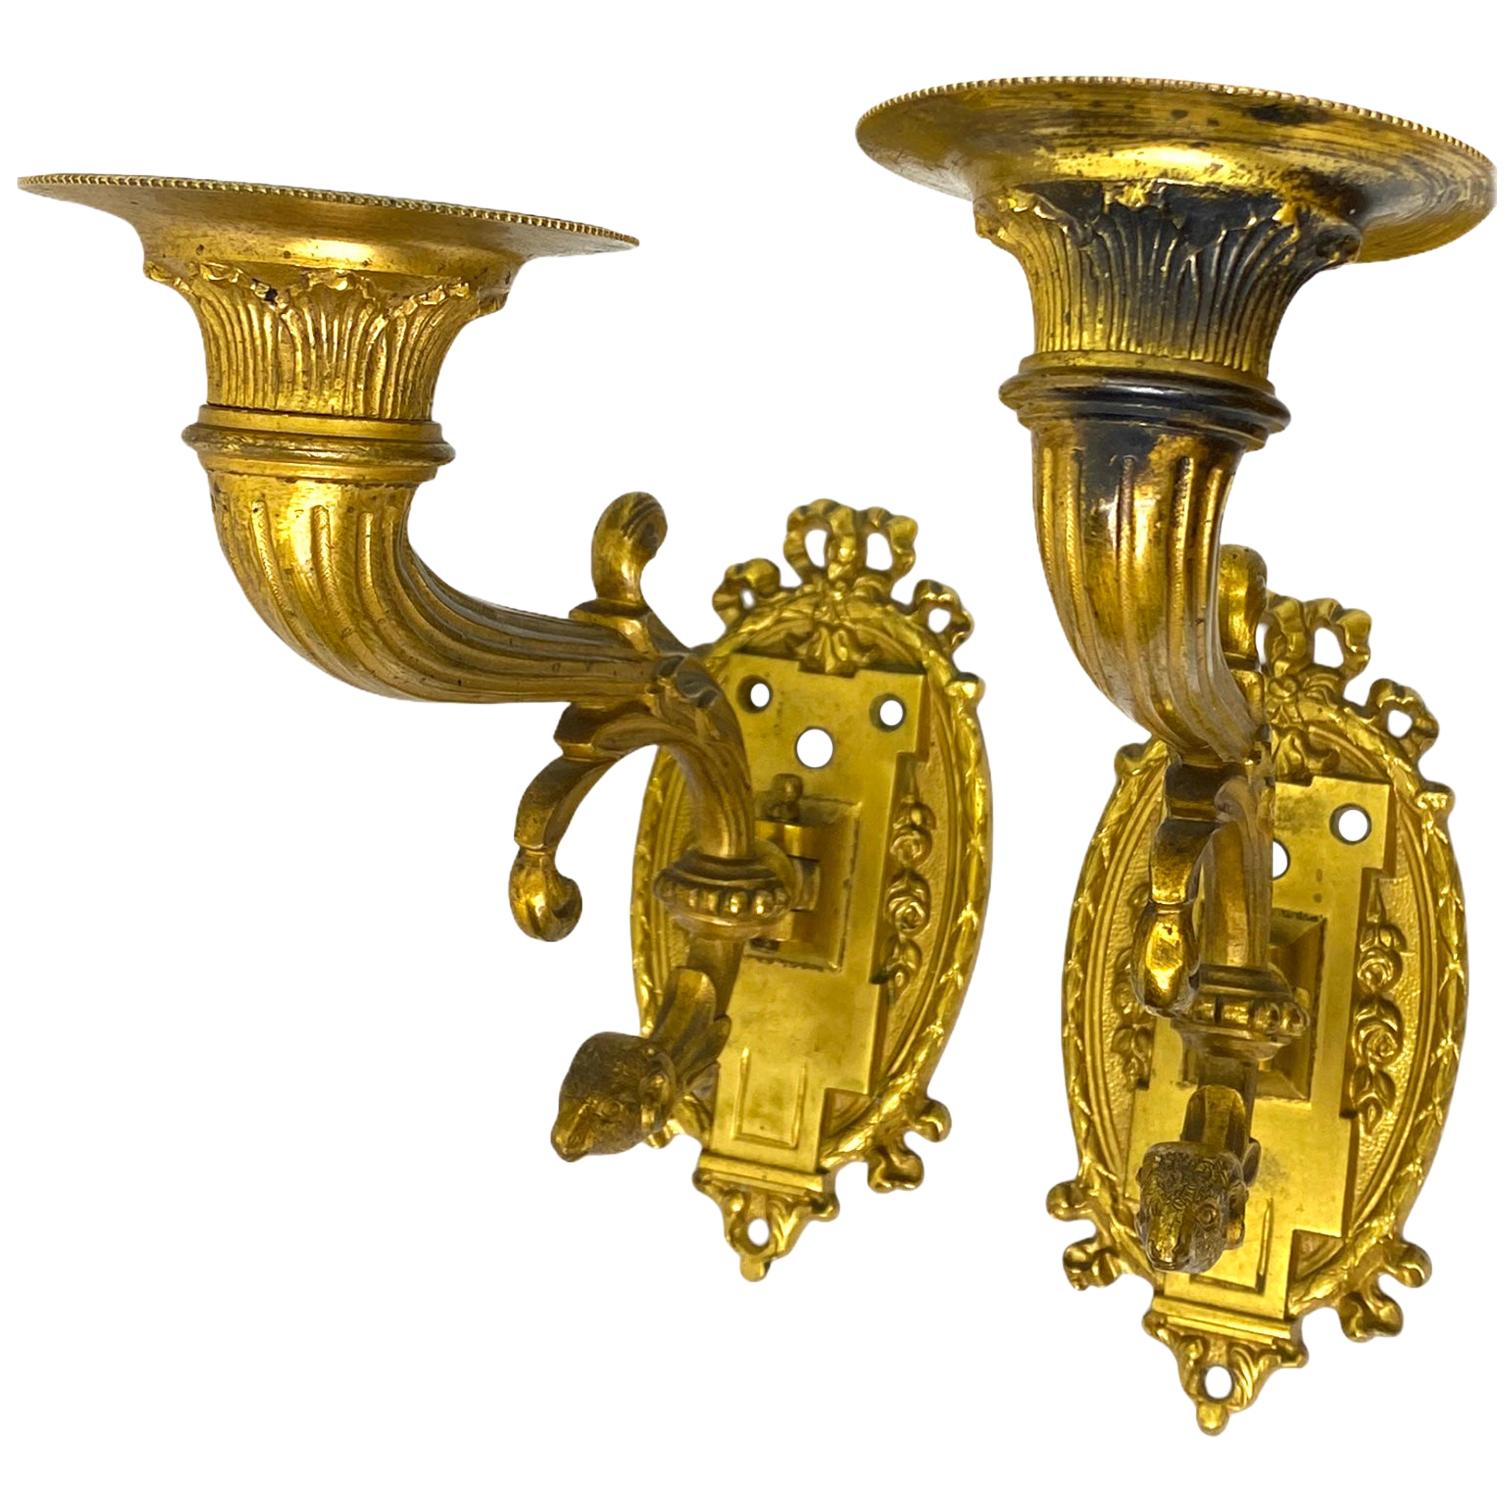 Two Original Bronze Neoclassical Candle Sconce for a Piano / Wall, France, 1850s